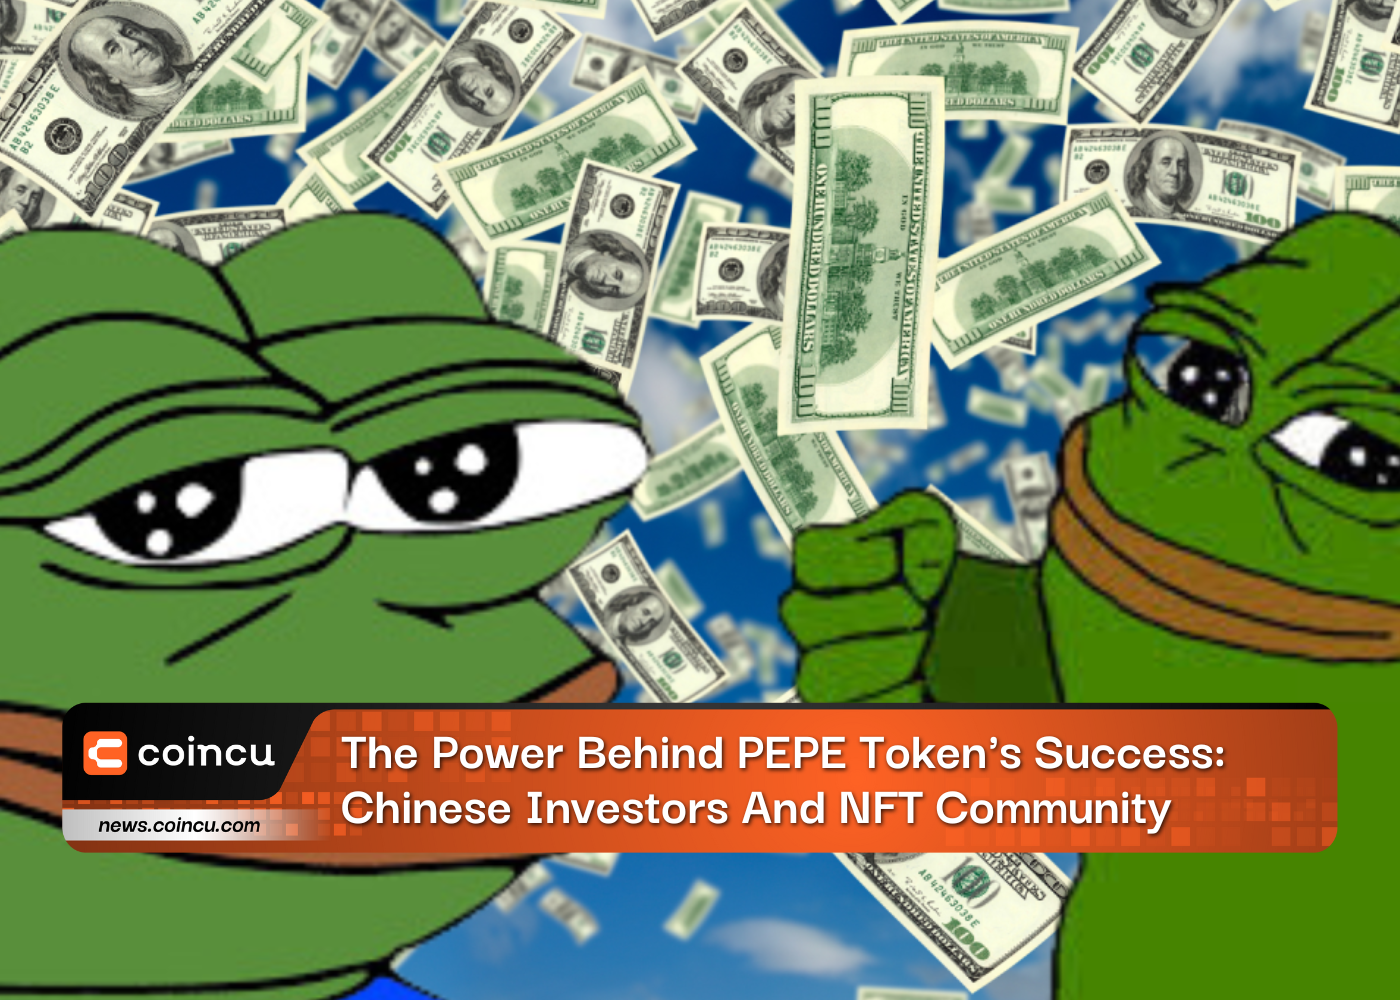 The Power Behind PEPE Token's Success: Chinese Investors And NFT Community